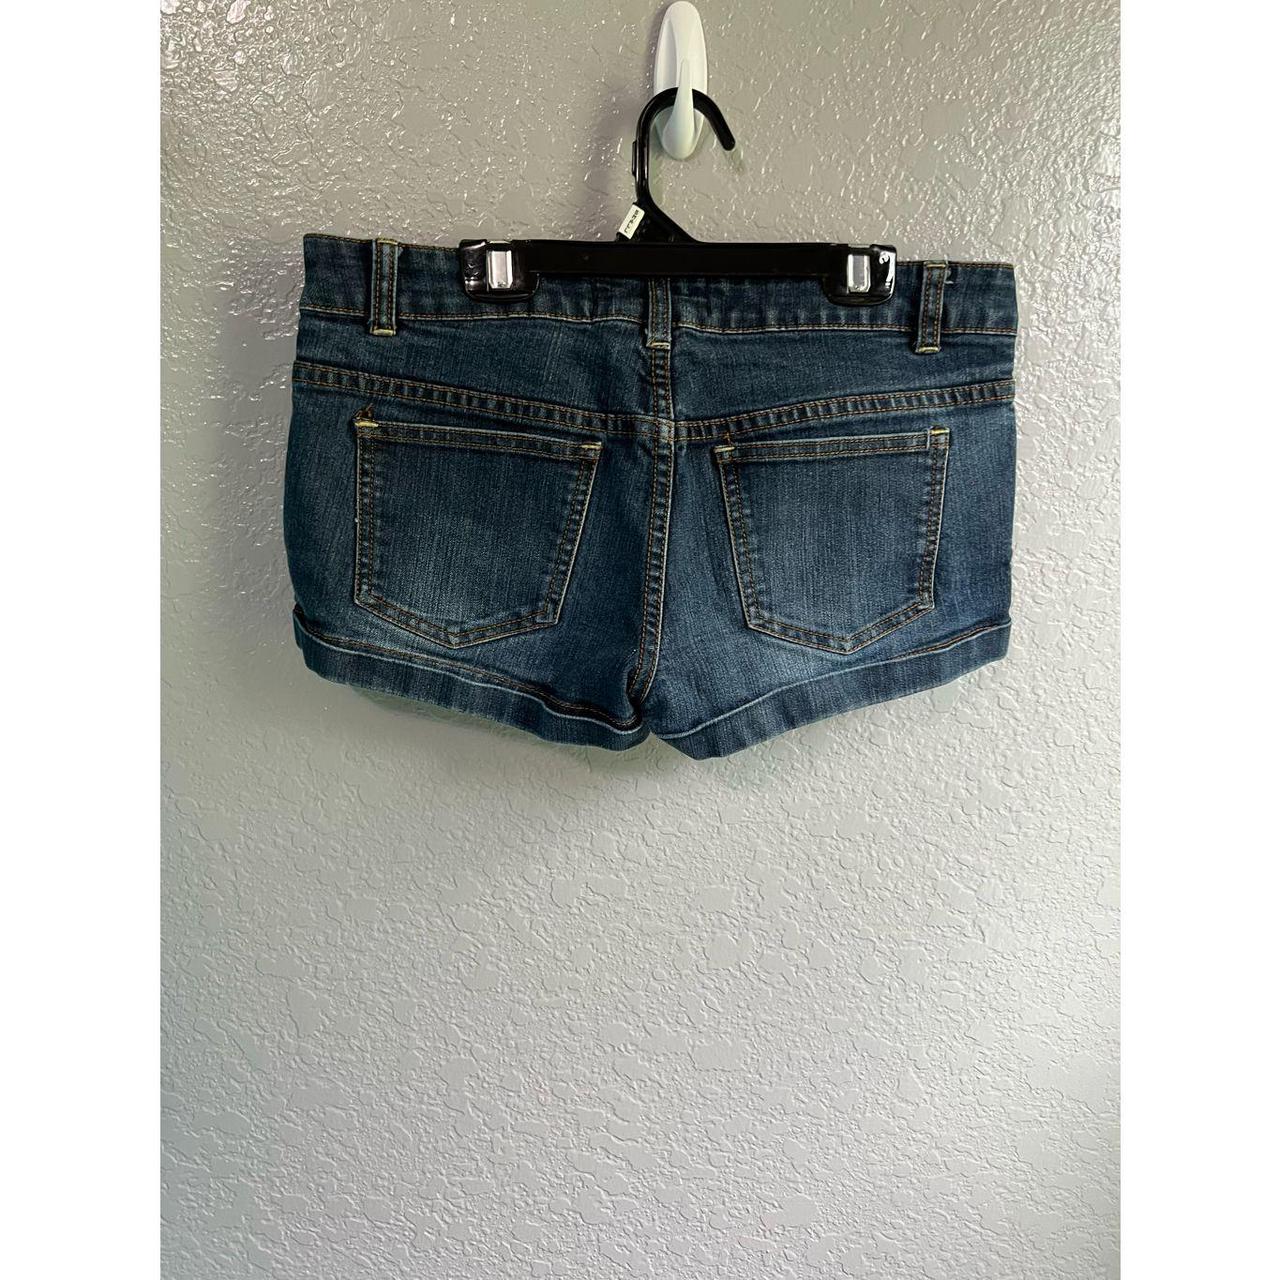 Product Image 2 - American vintage iris jeans size